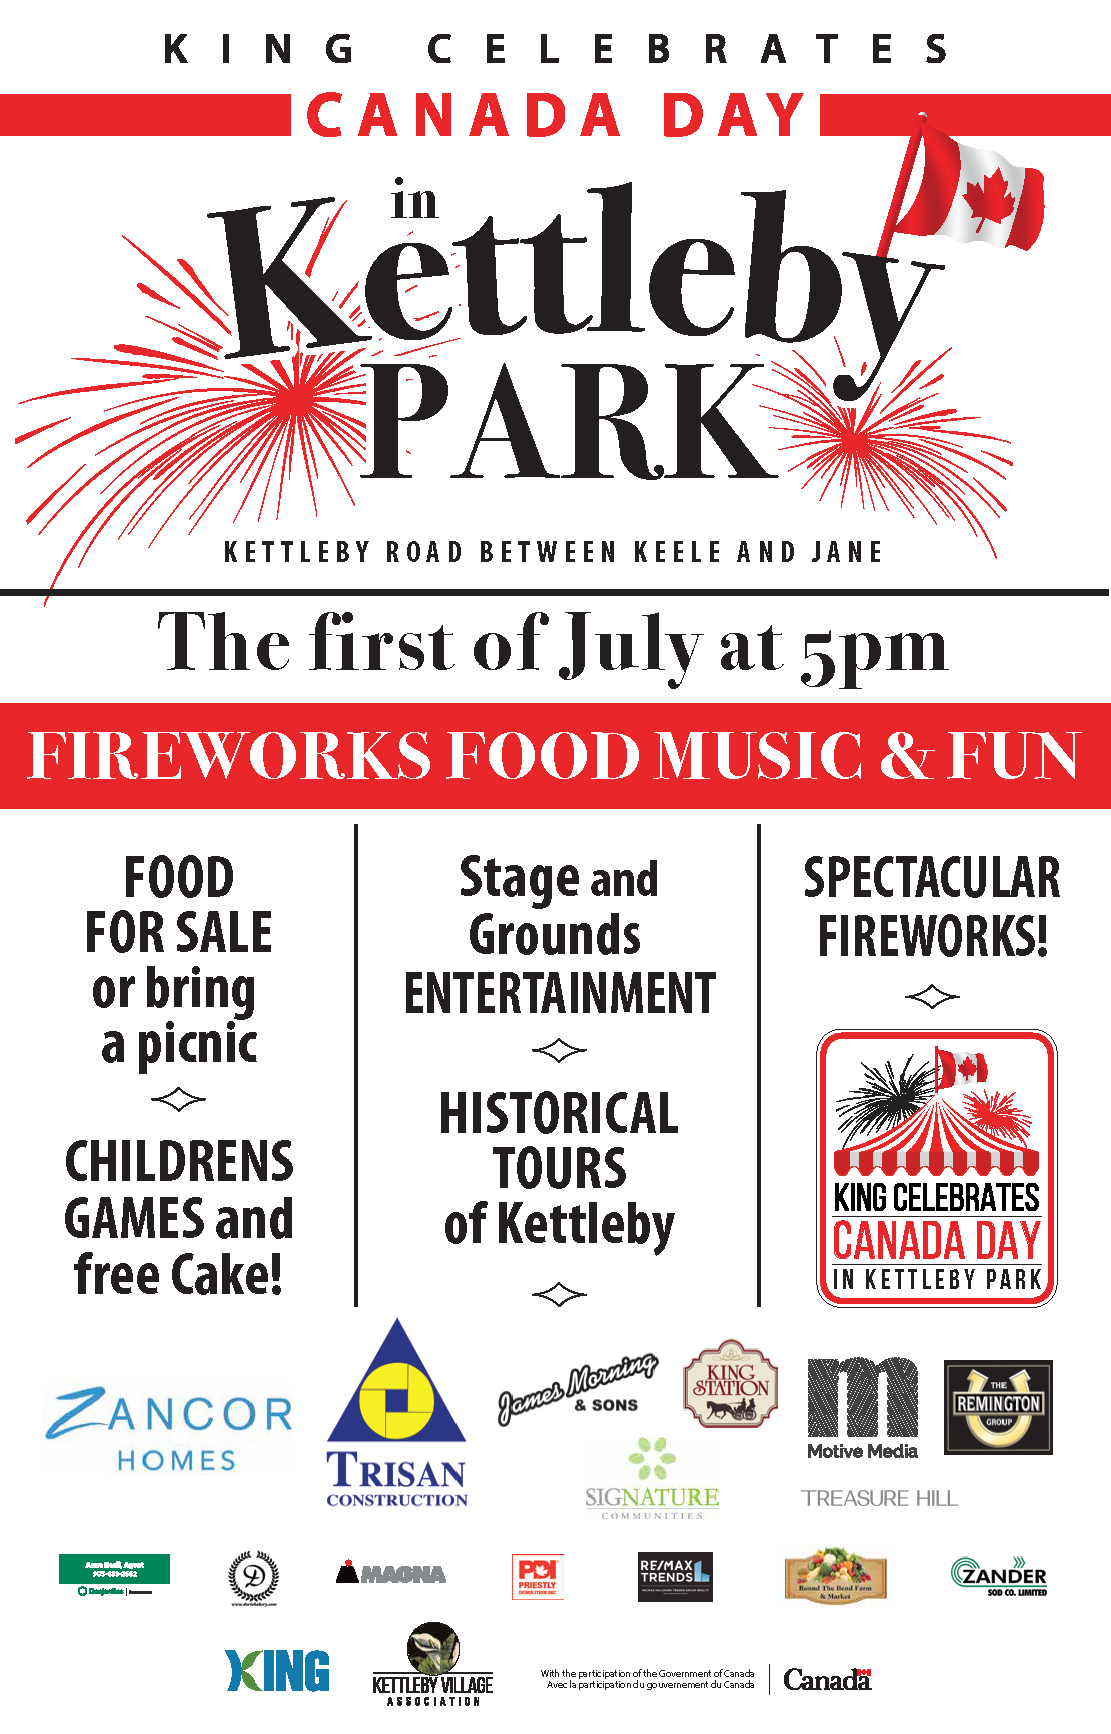 Canada Day in Kettleby Park